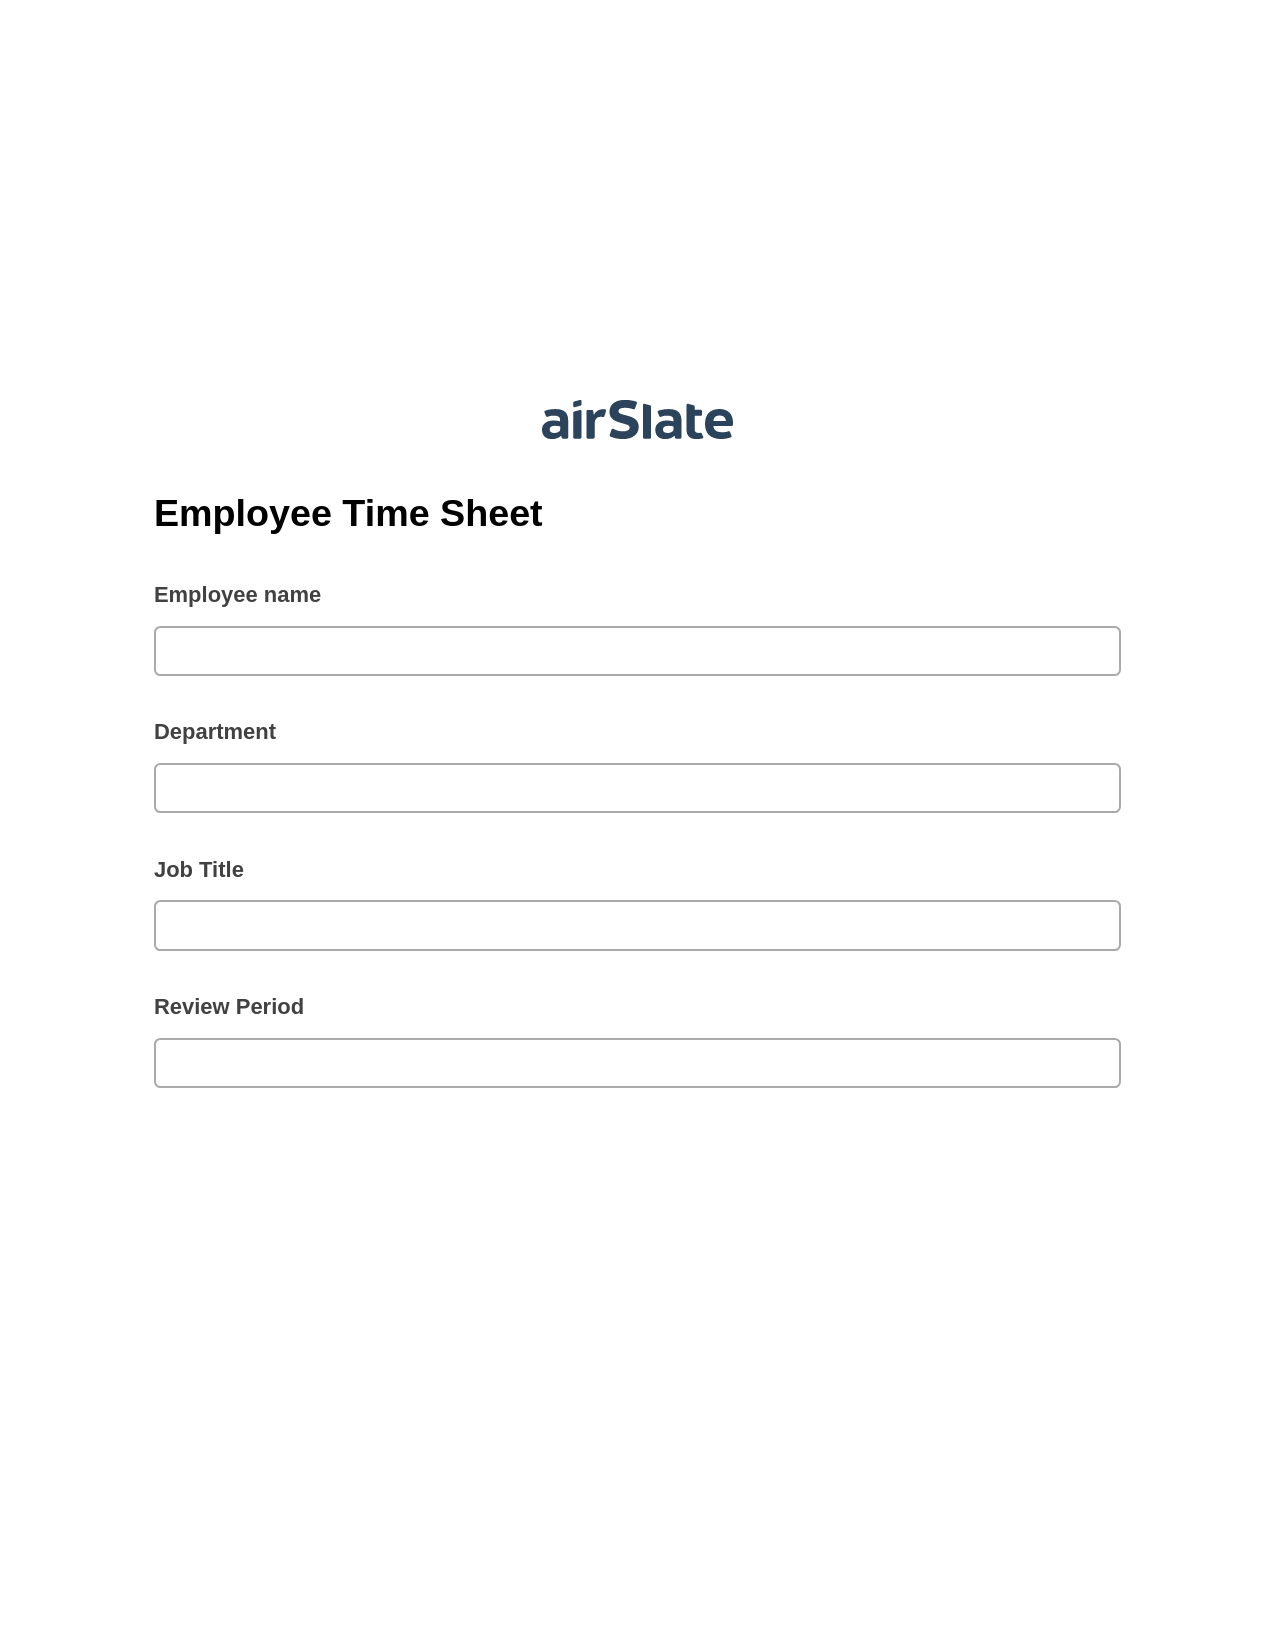 Employee Time Sheet Pre-fill from Excel Spreadsheet Bot, Create Salesforce Records Bot, Archive to OneDrive Bot